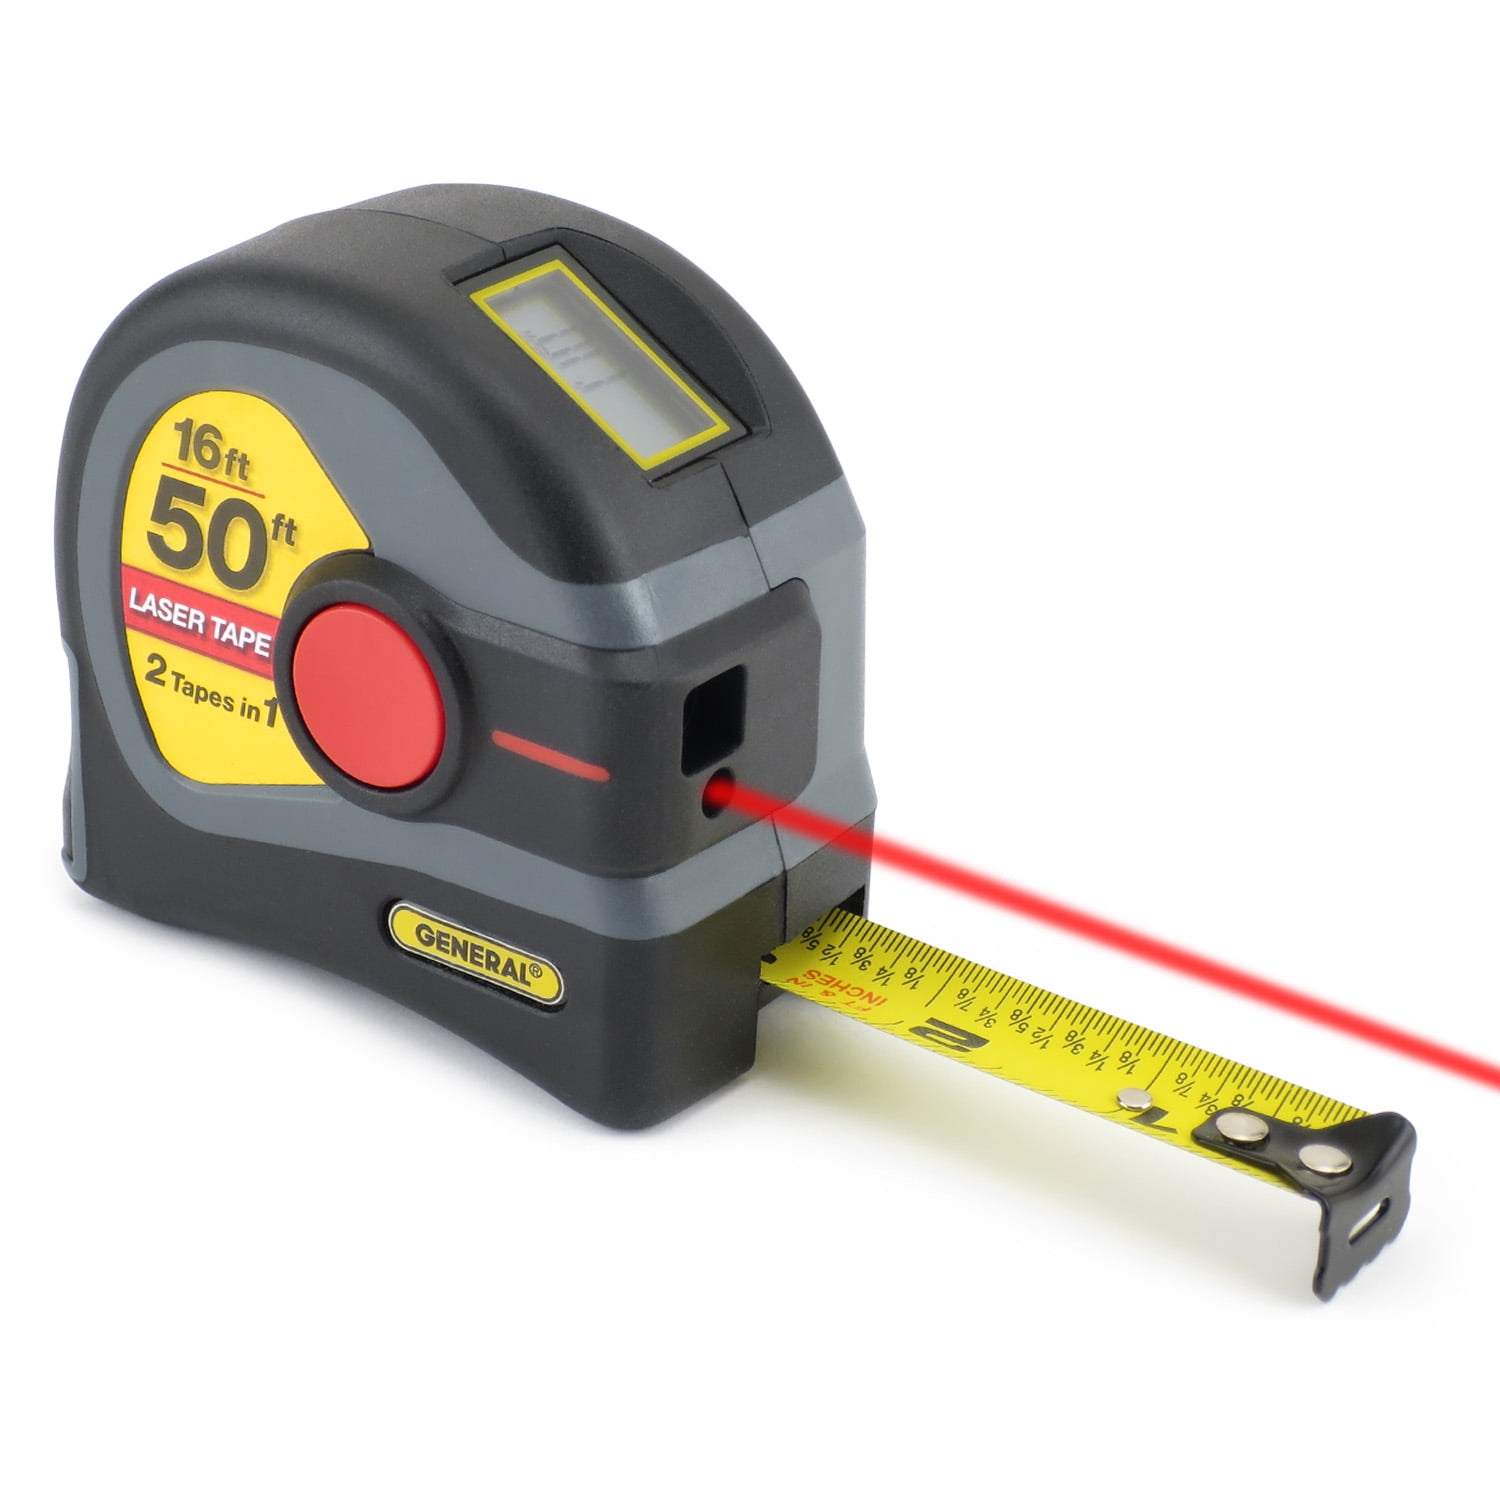 LEXIVON 2 in 1 Digital Laser Tape Measure | 130ft/40m Laser Distance Meter  Display On Backlit LCD Screen with 16ft/5m AutoLock Measuring Tape 